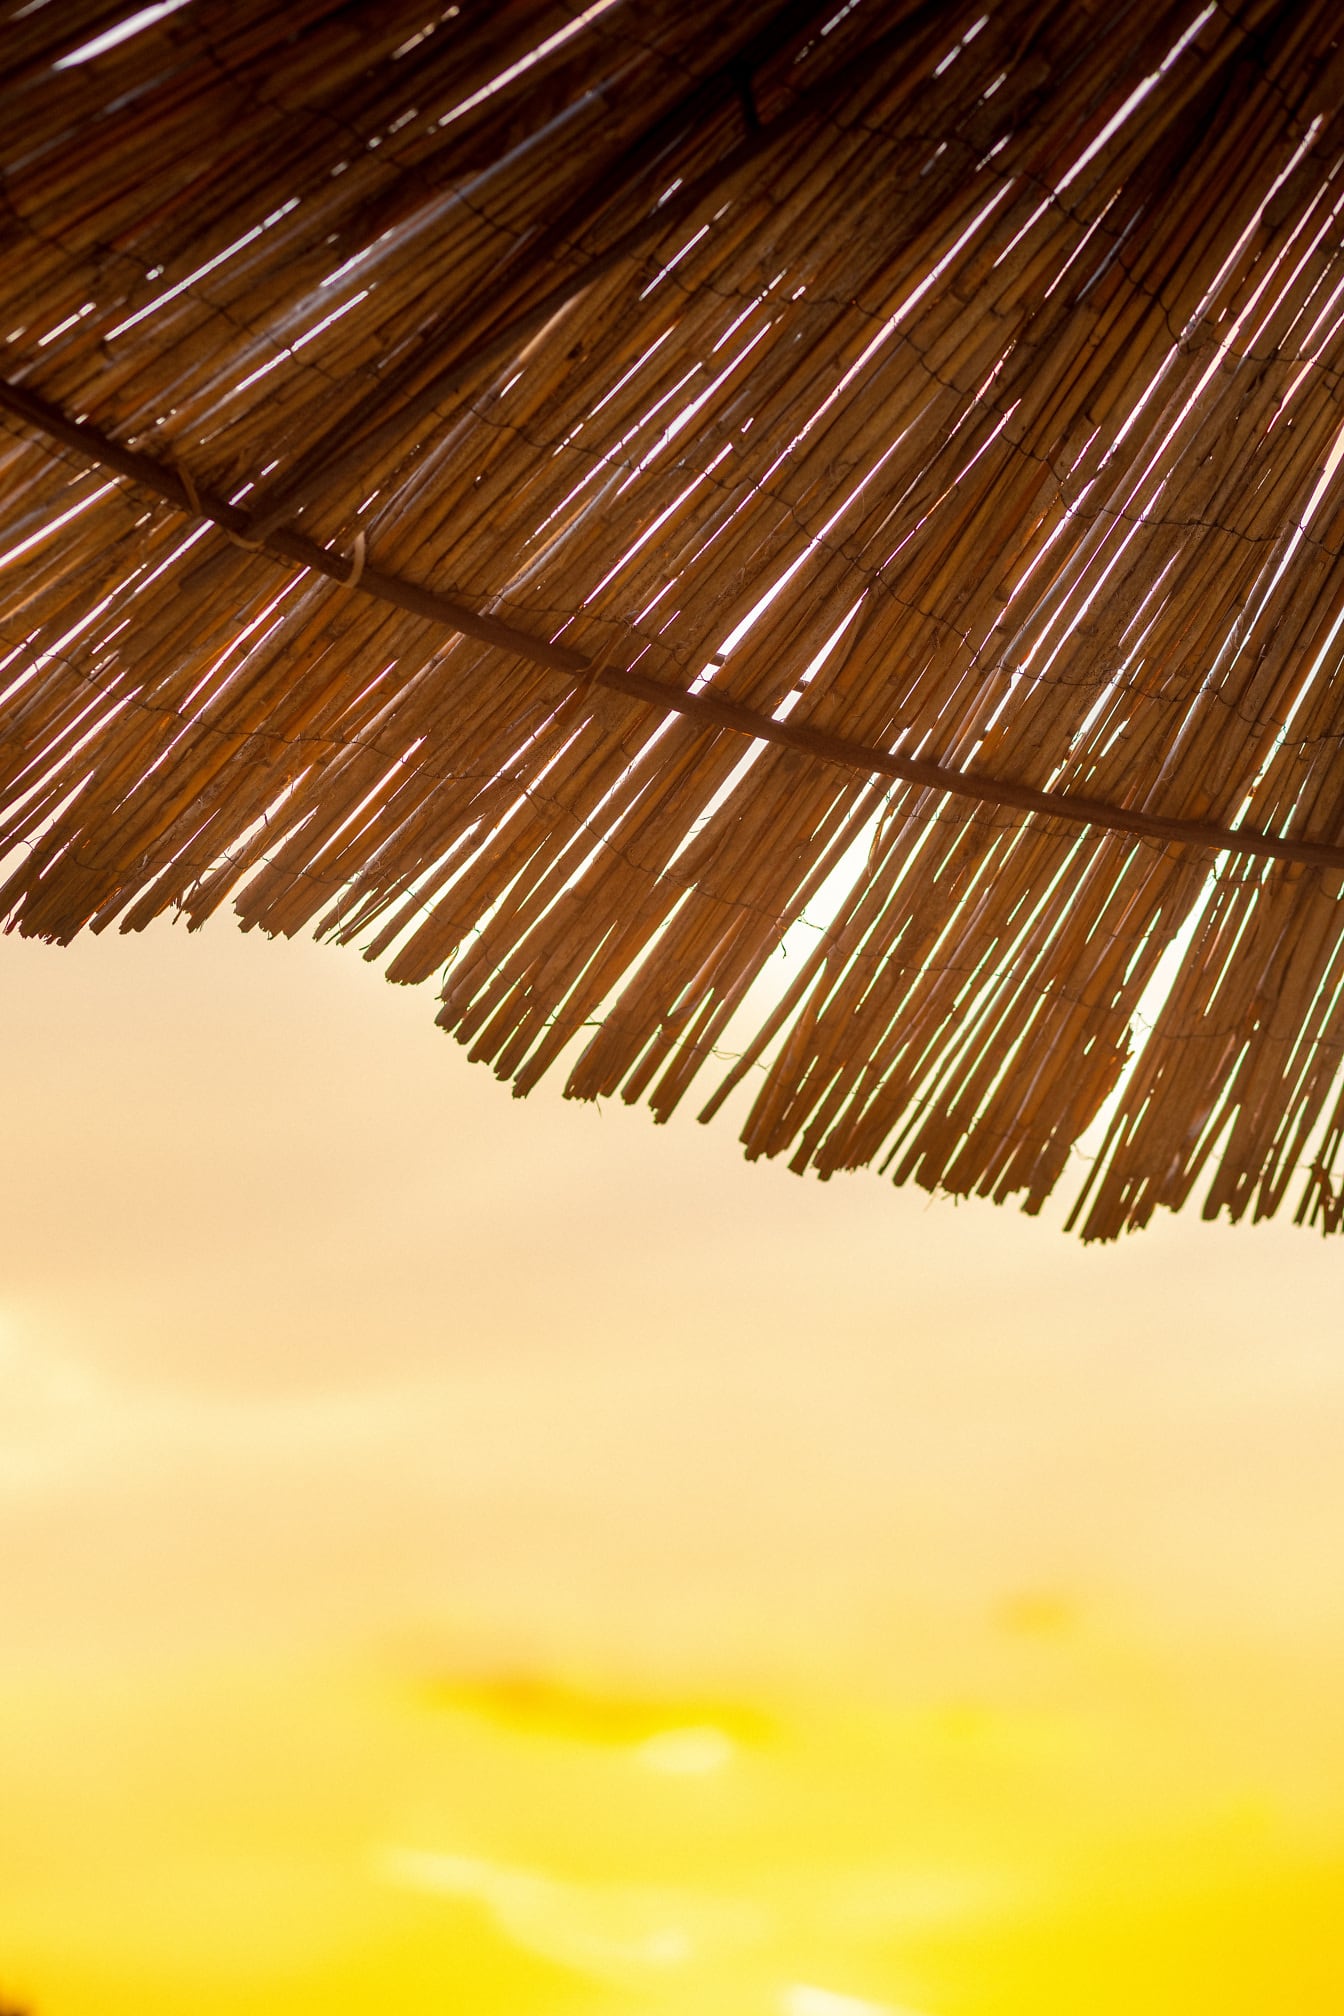 Parasol roof with bright yellow sky glow in background